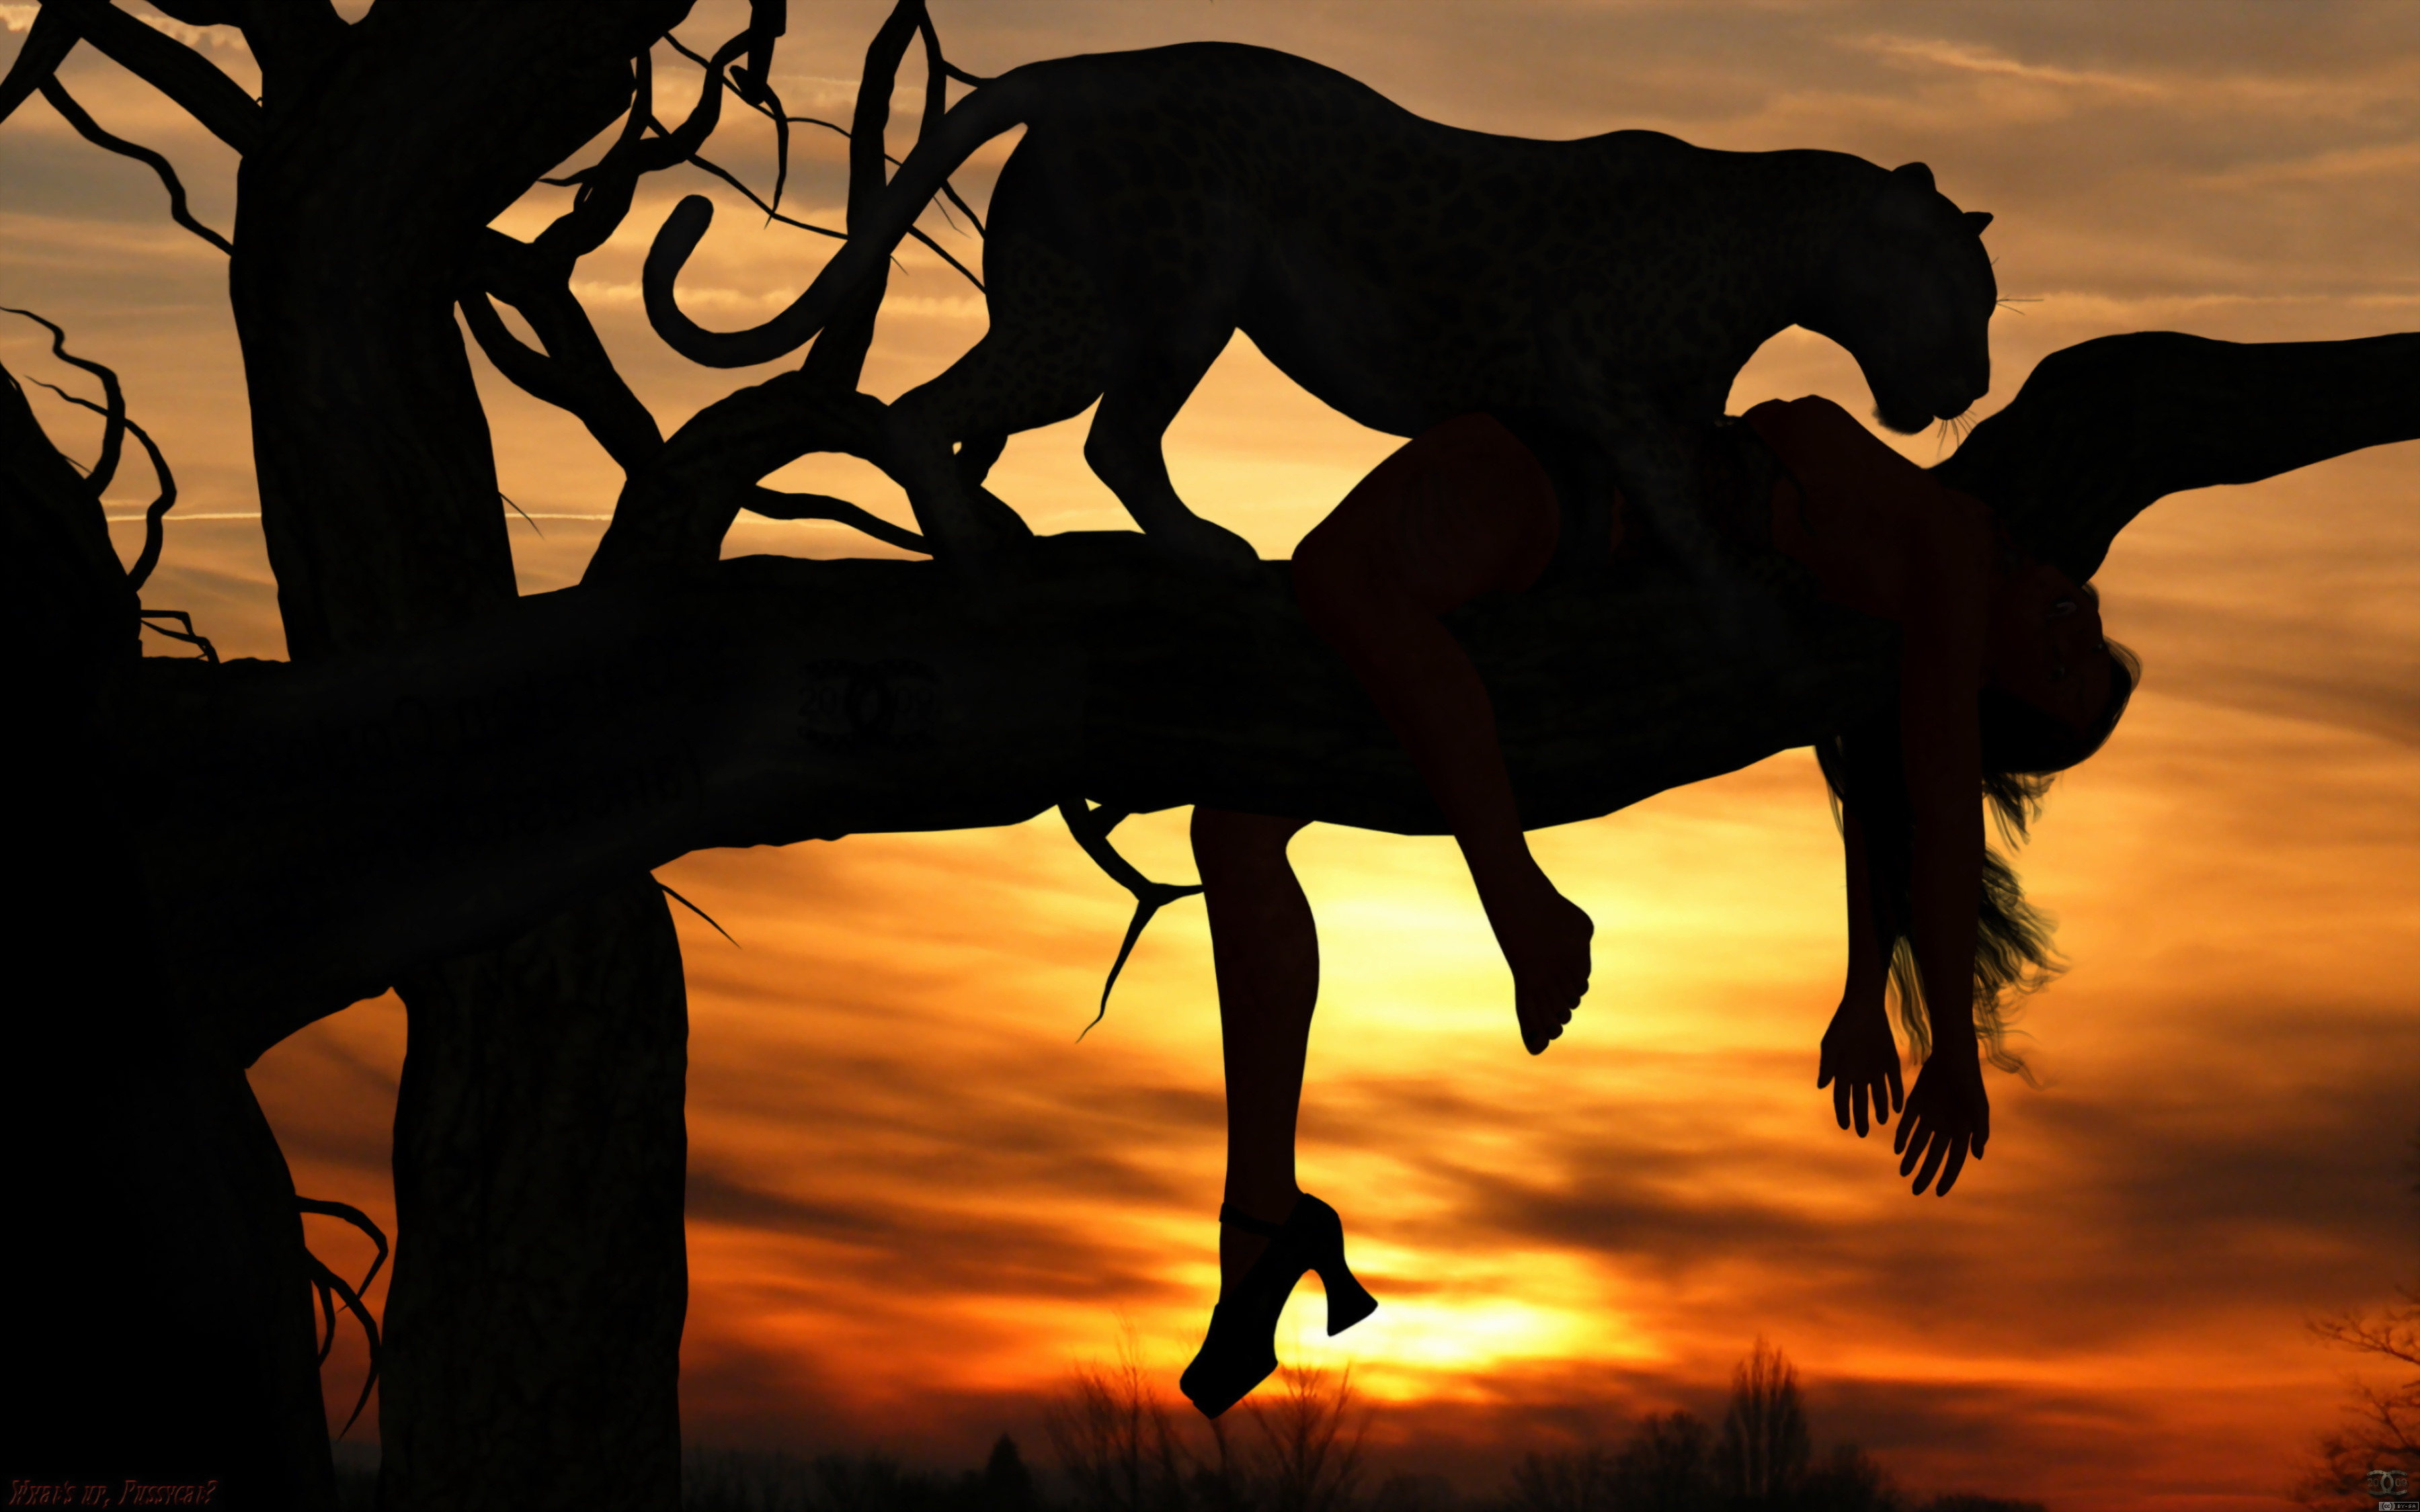 animals, Cats, Dark, Horror, Scary, Creepy, Macabre, Situations, Mood,  Women, Females, Girls, Manipulations, Cg, Digital art, Sunset, Sunrise,  Africa, Leopards Wallpapers HD / Desktop and Mobile Backgrounds